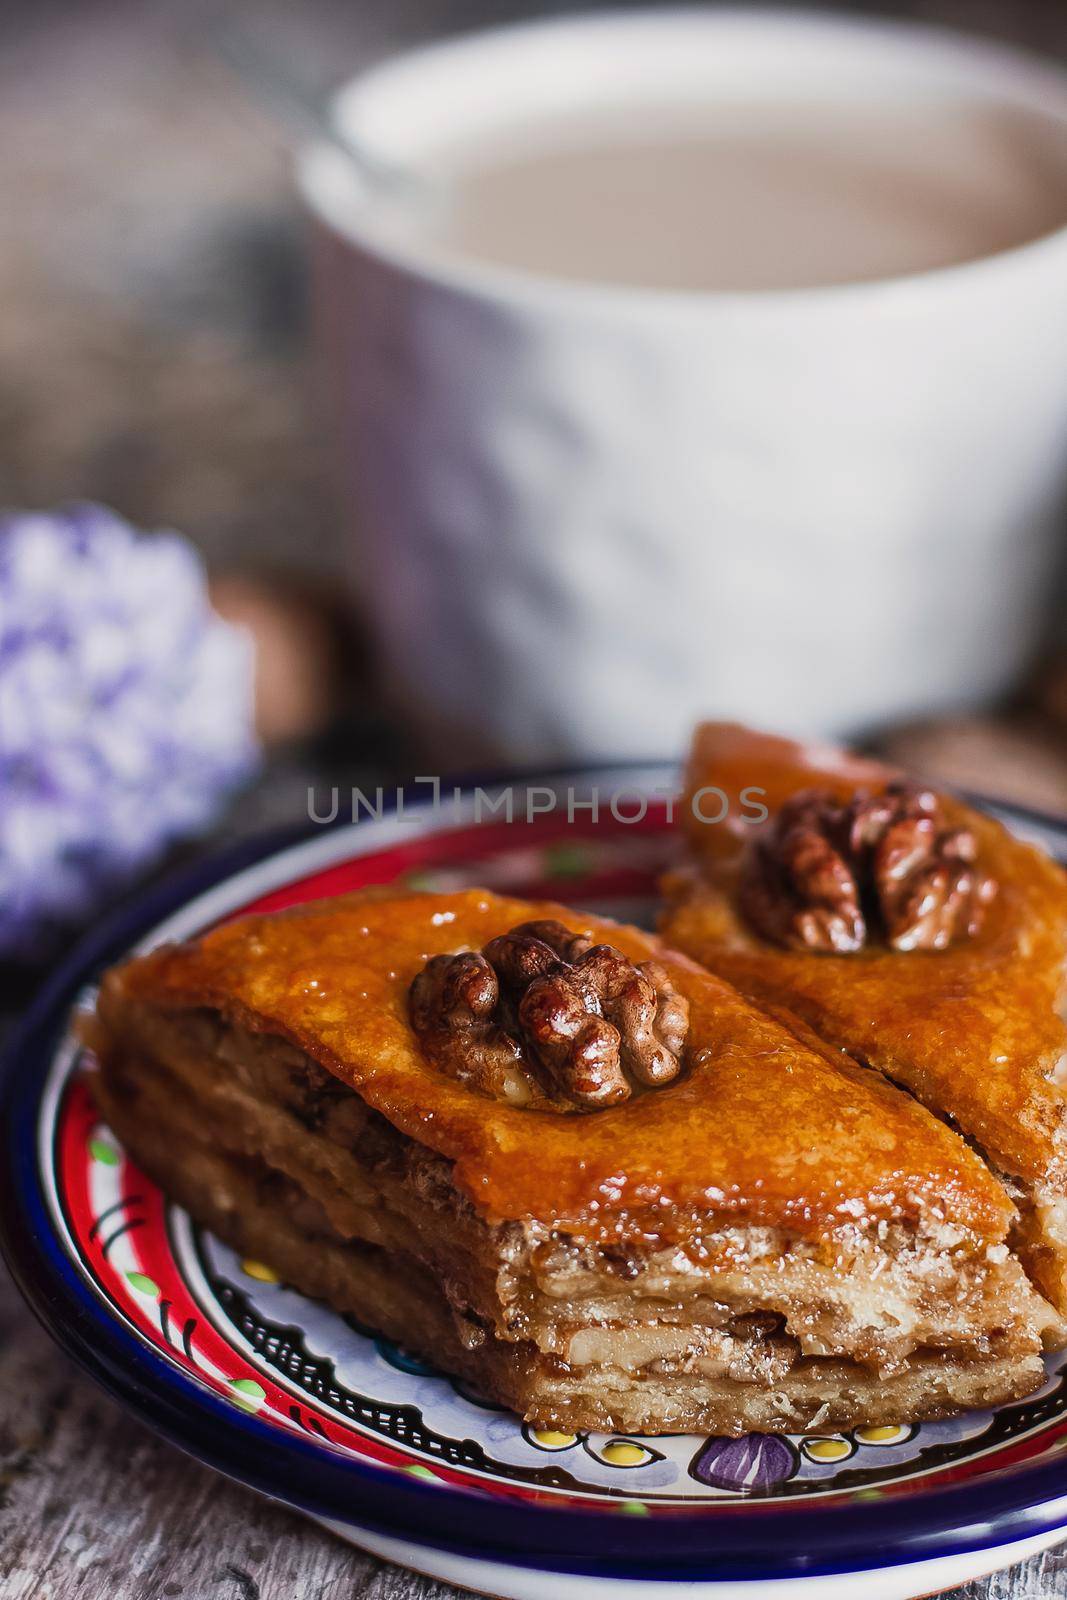 Assorted baklava. A Turkish ramadan arabic sweet dessert on a decorative plate, with coffee cup in the background. Middle eastern food baklava with nuts and honey syrup by mmp1206